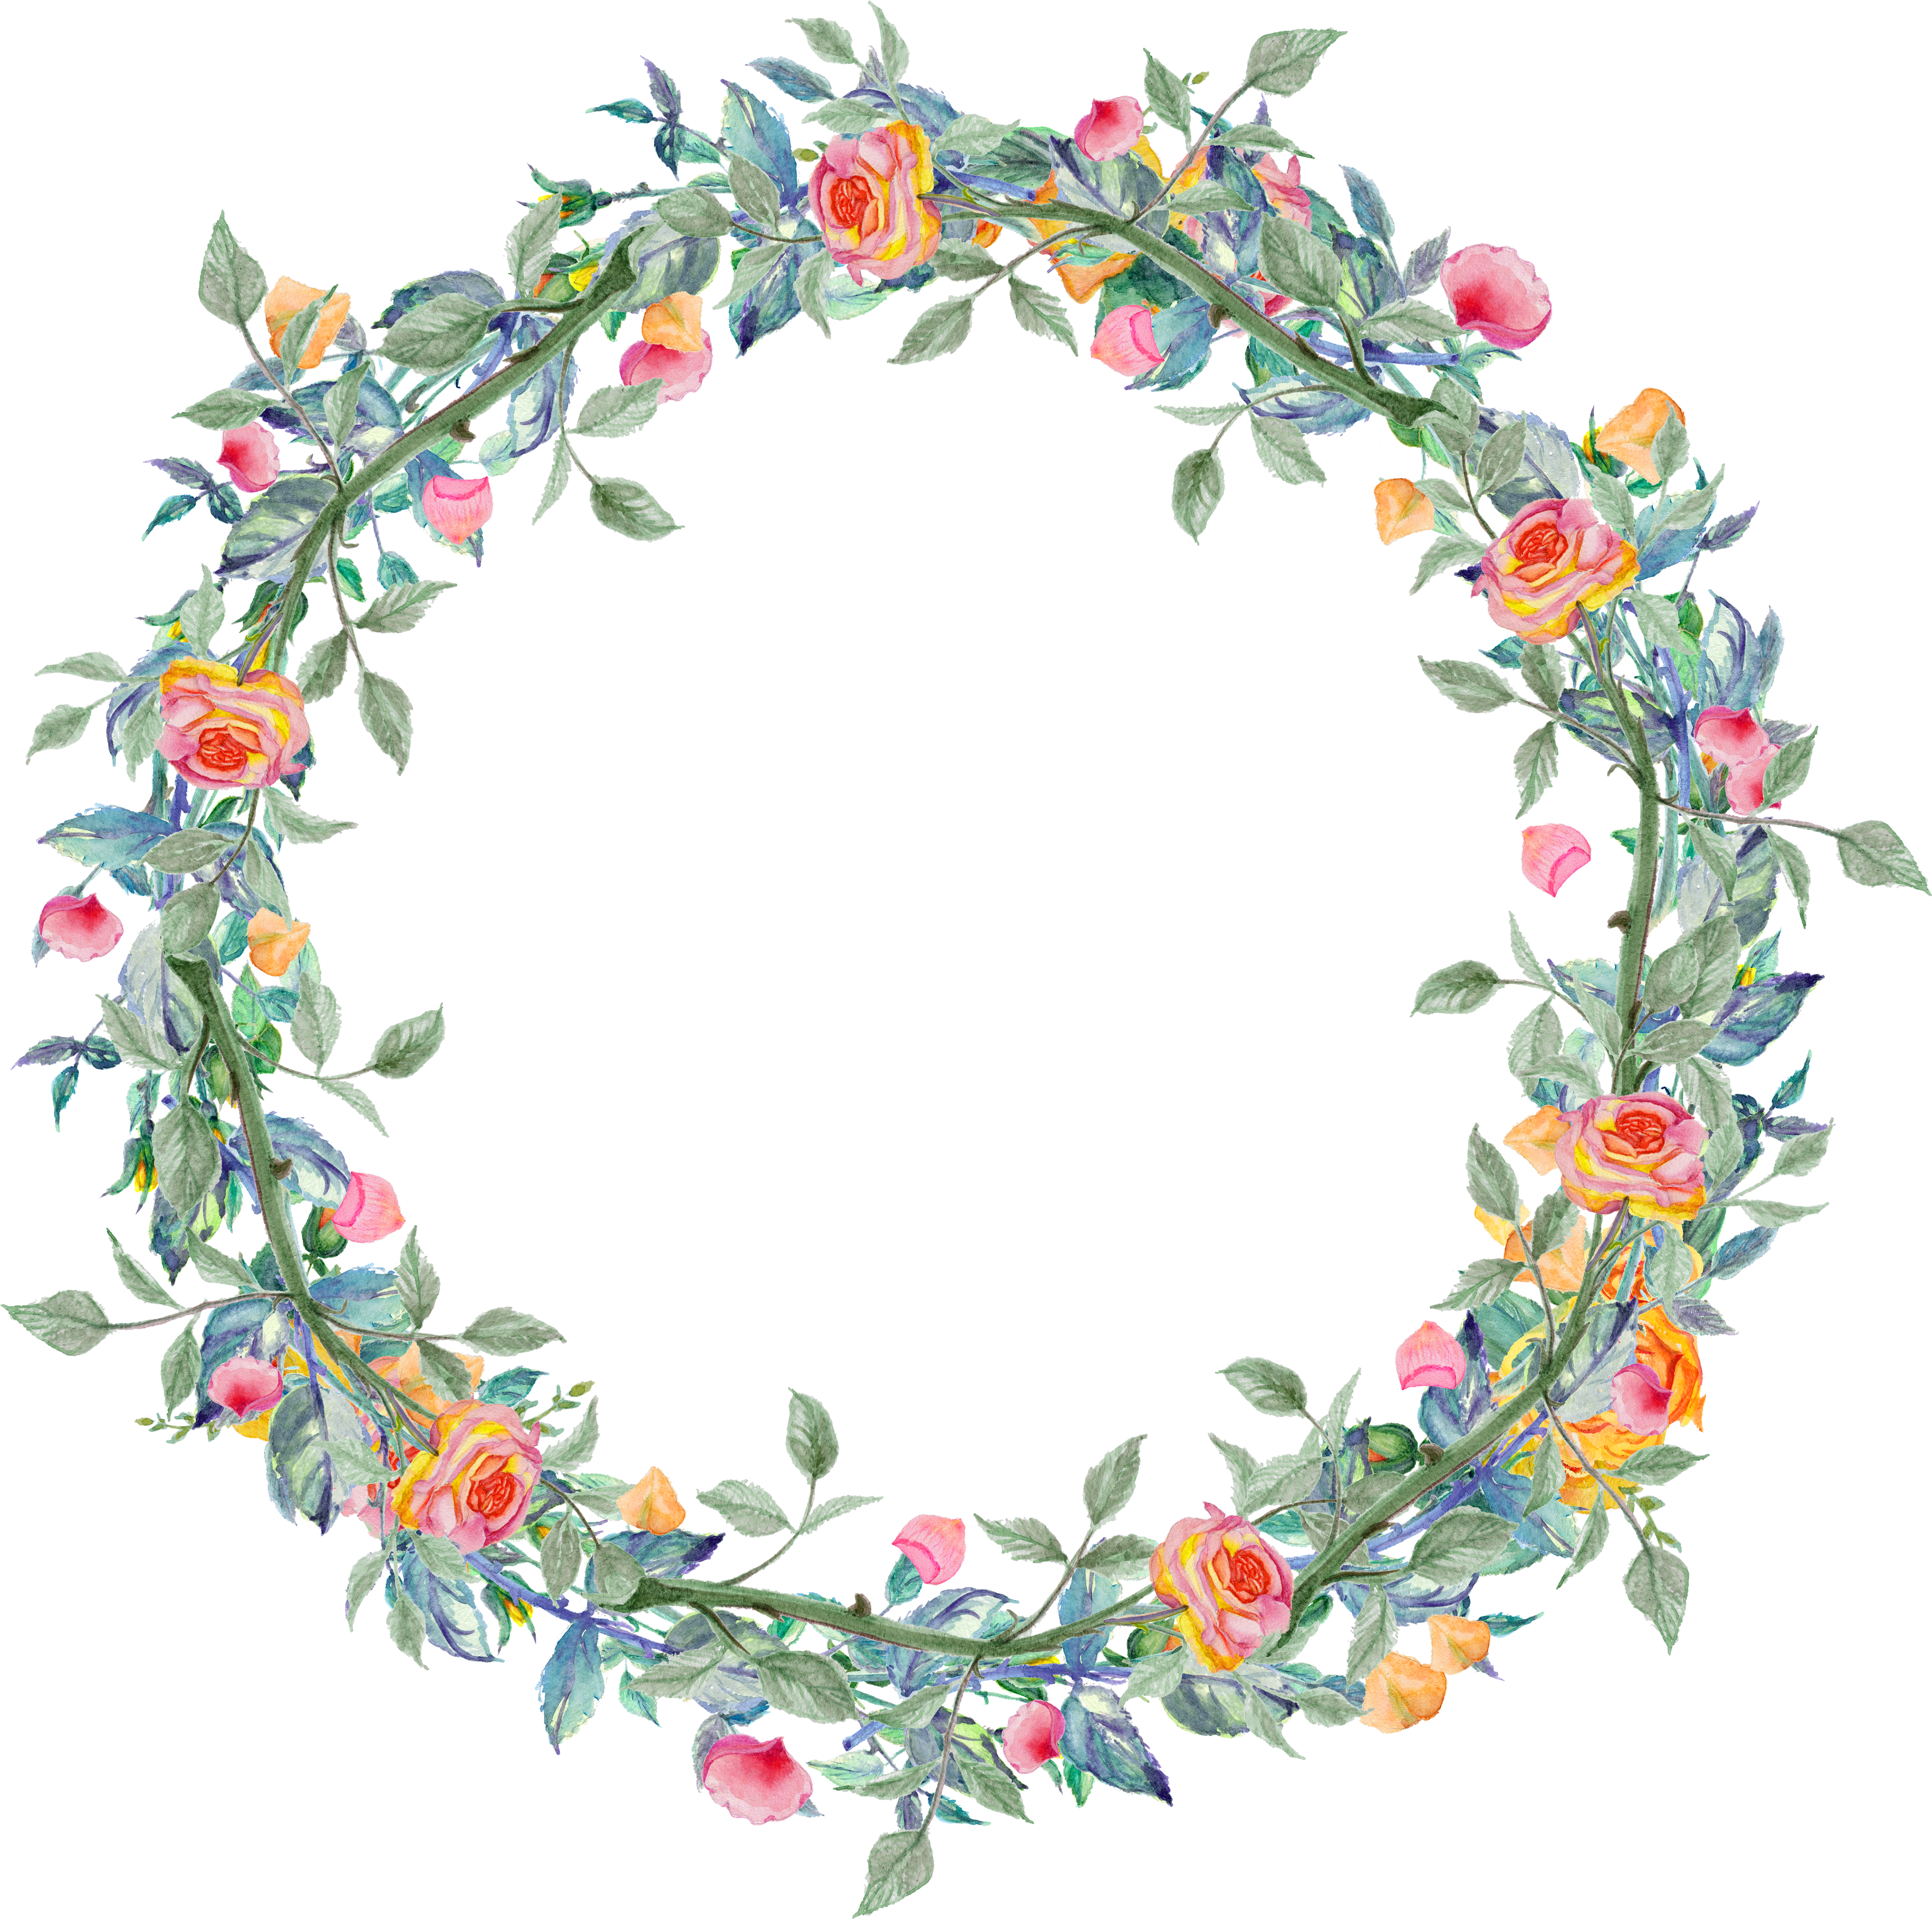 like this, christmas wreath, square Transparent PNG Photoshop